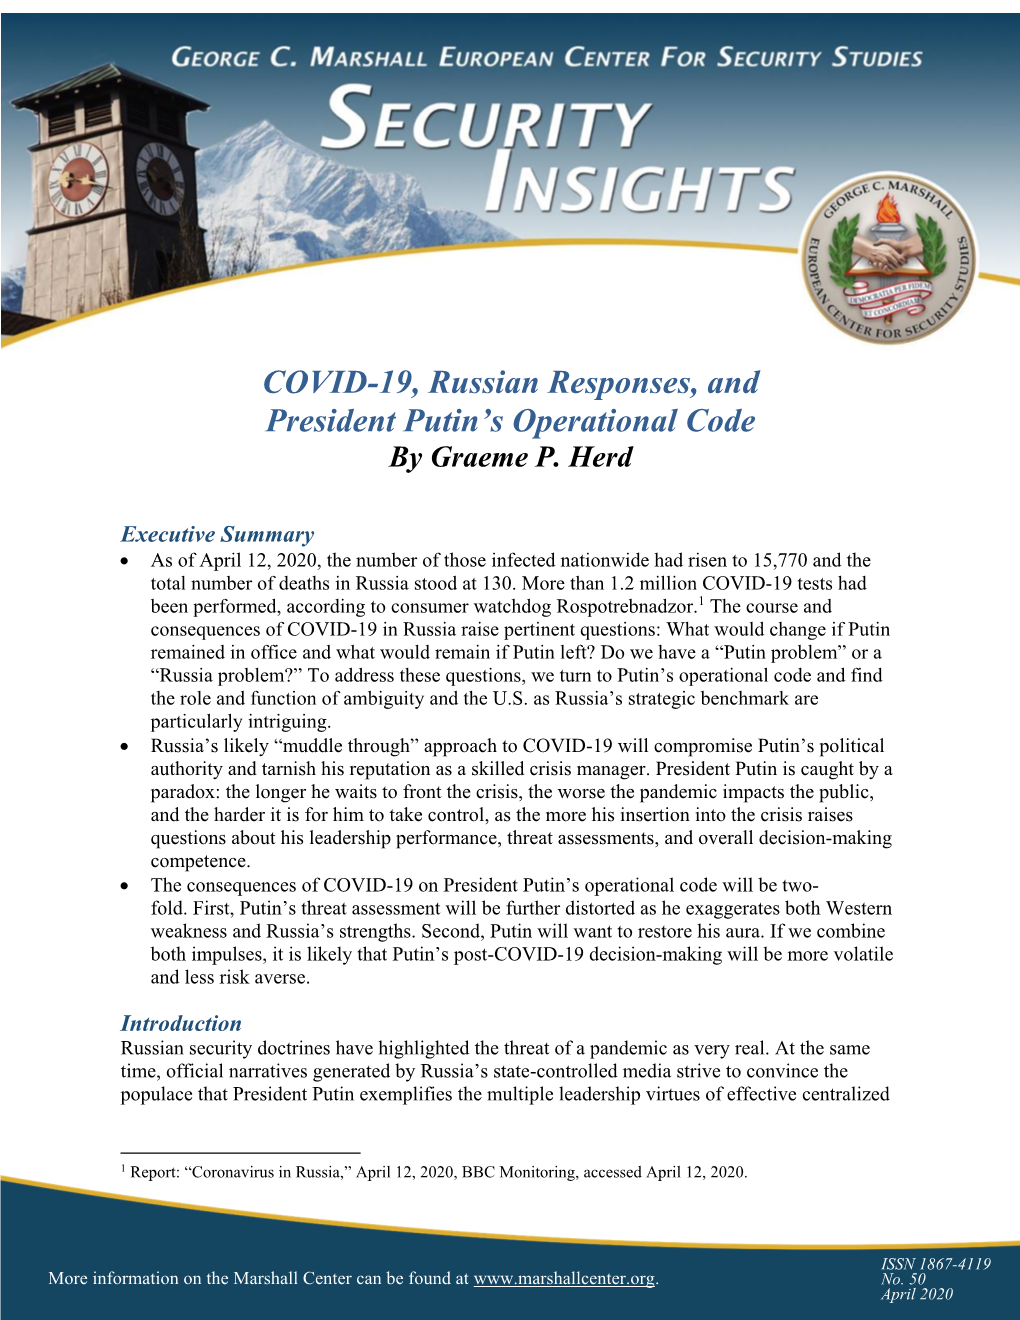 COVID-19, Russian Responses, and President Putin's Operational